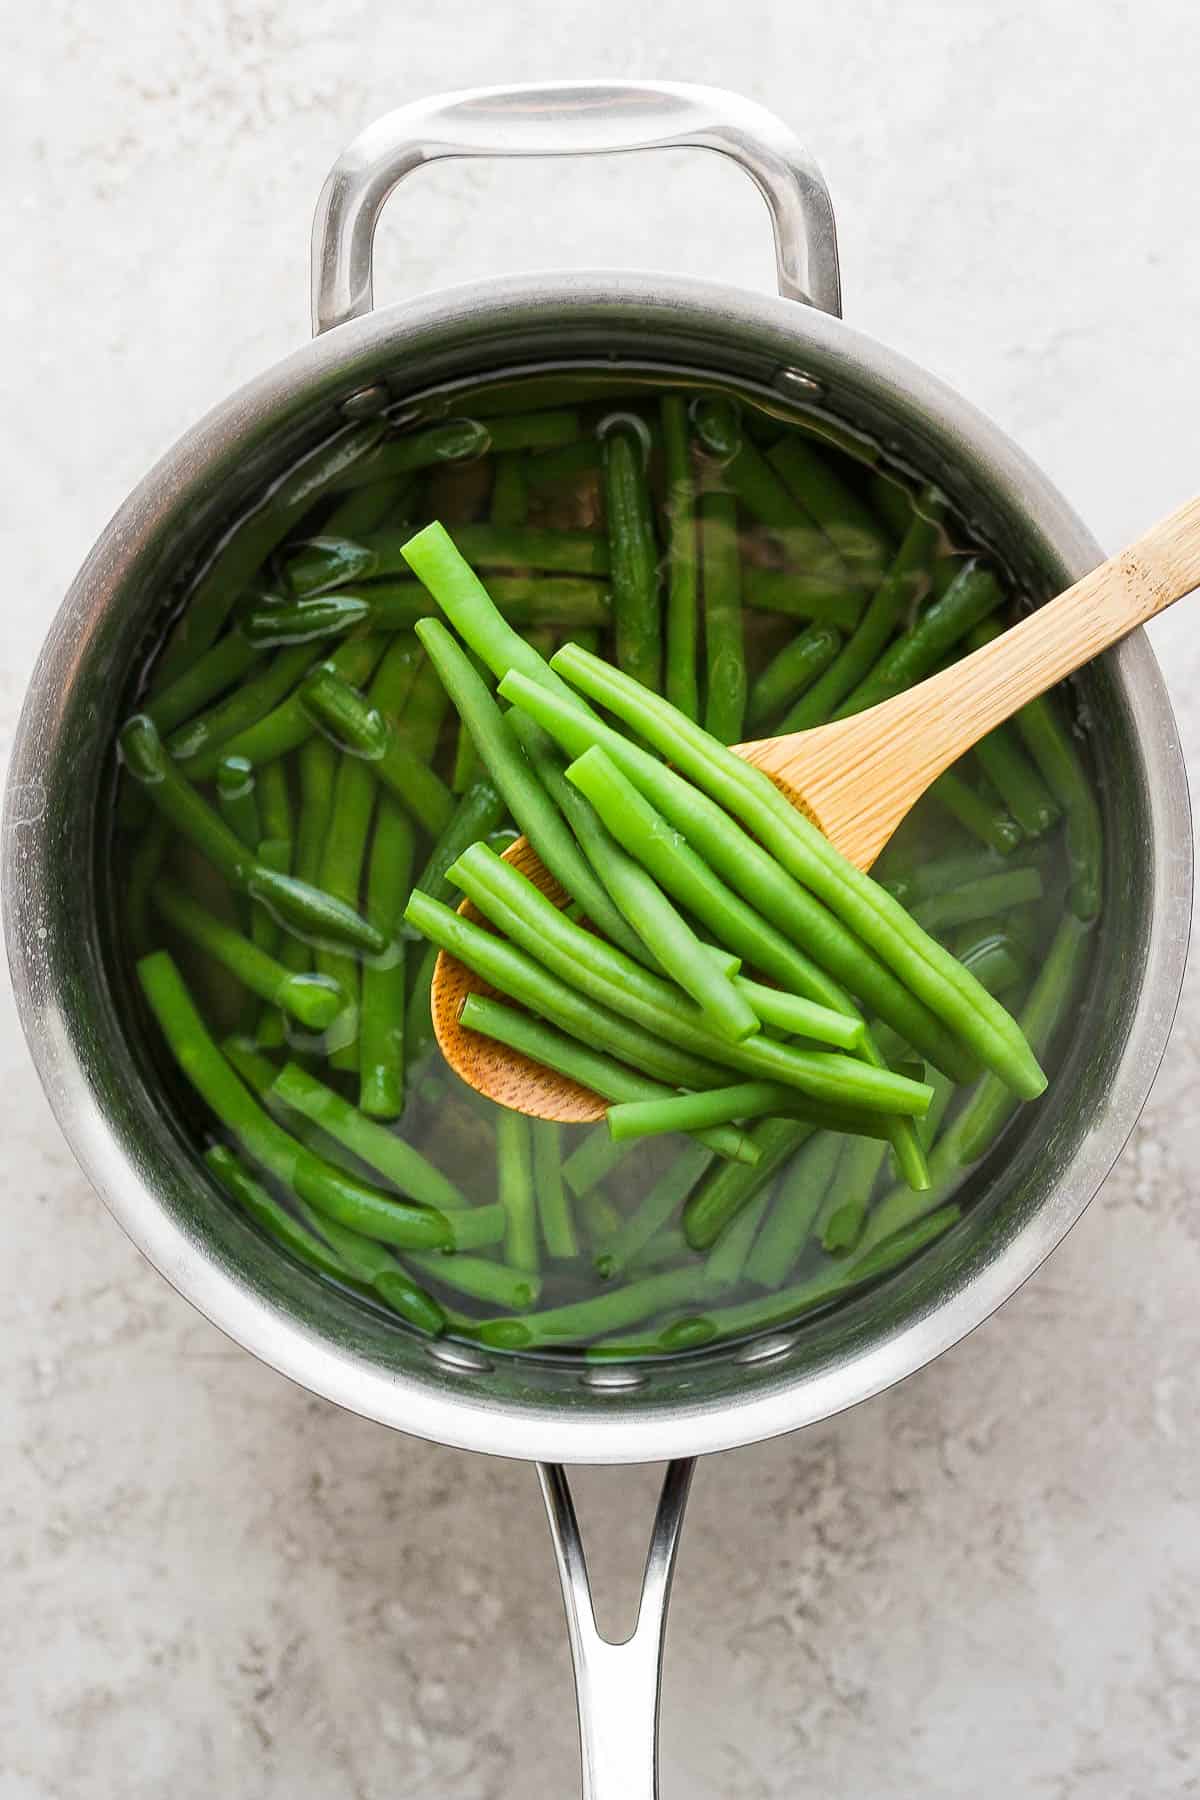 Boiled green beans in a sauce pan filled with water with a wooden slotted spoon pulling a few out.